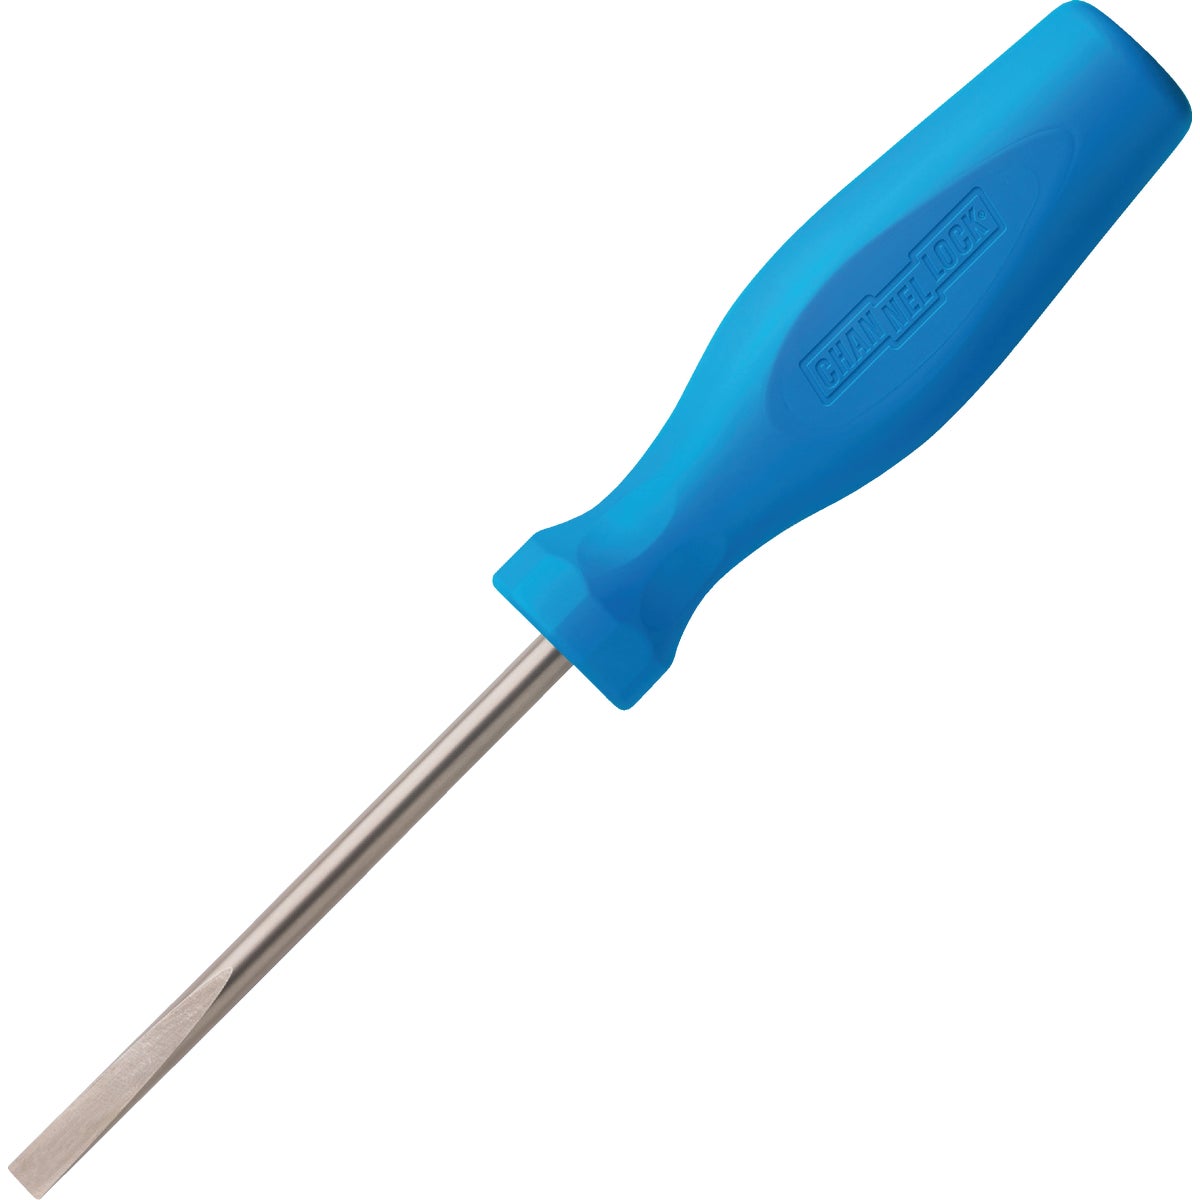 Channellock 1/4 In. x 4 In. Professional Slotted Screwdriver